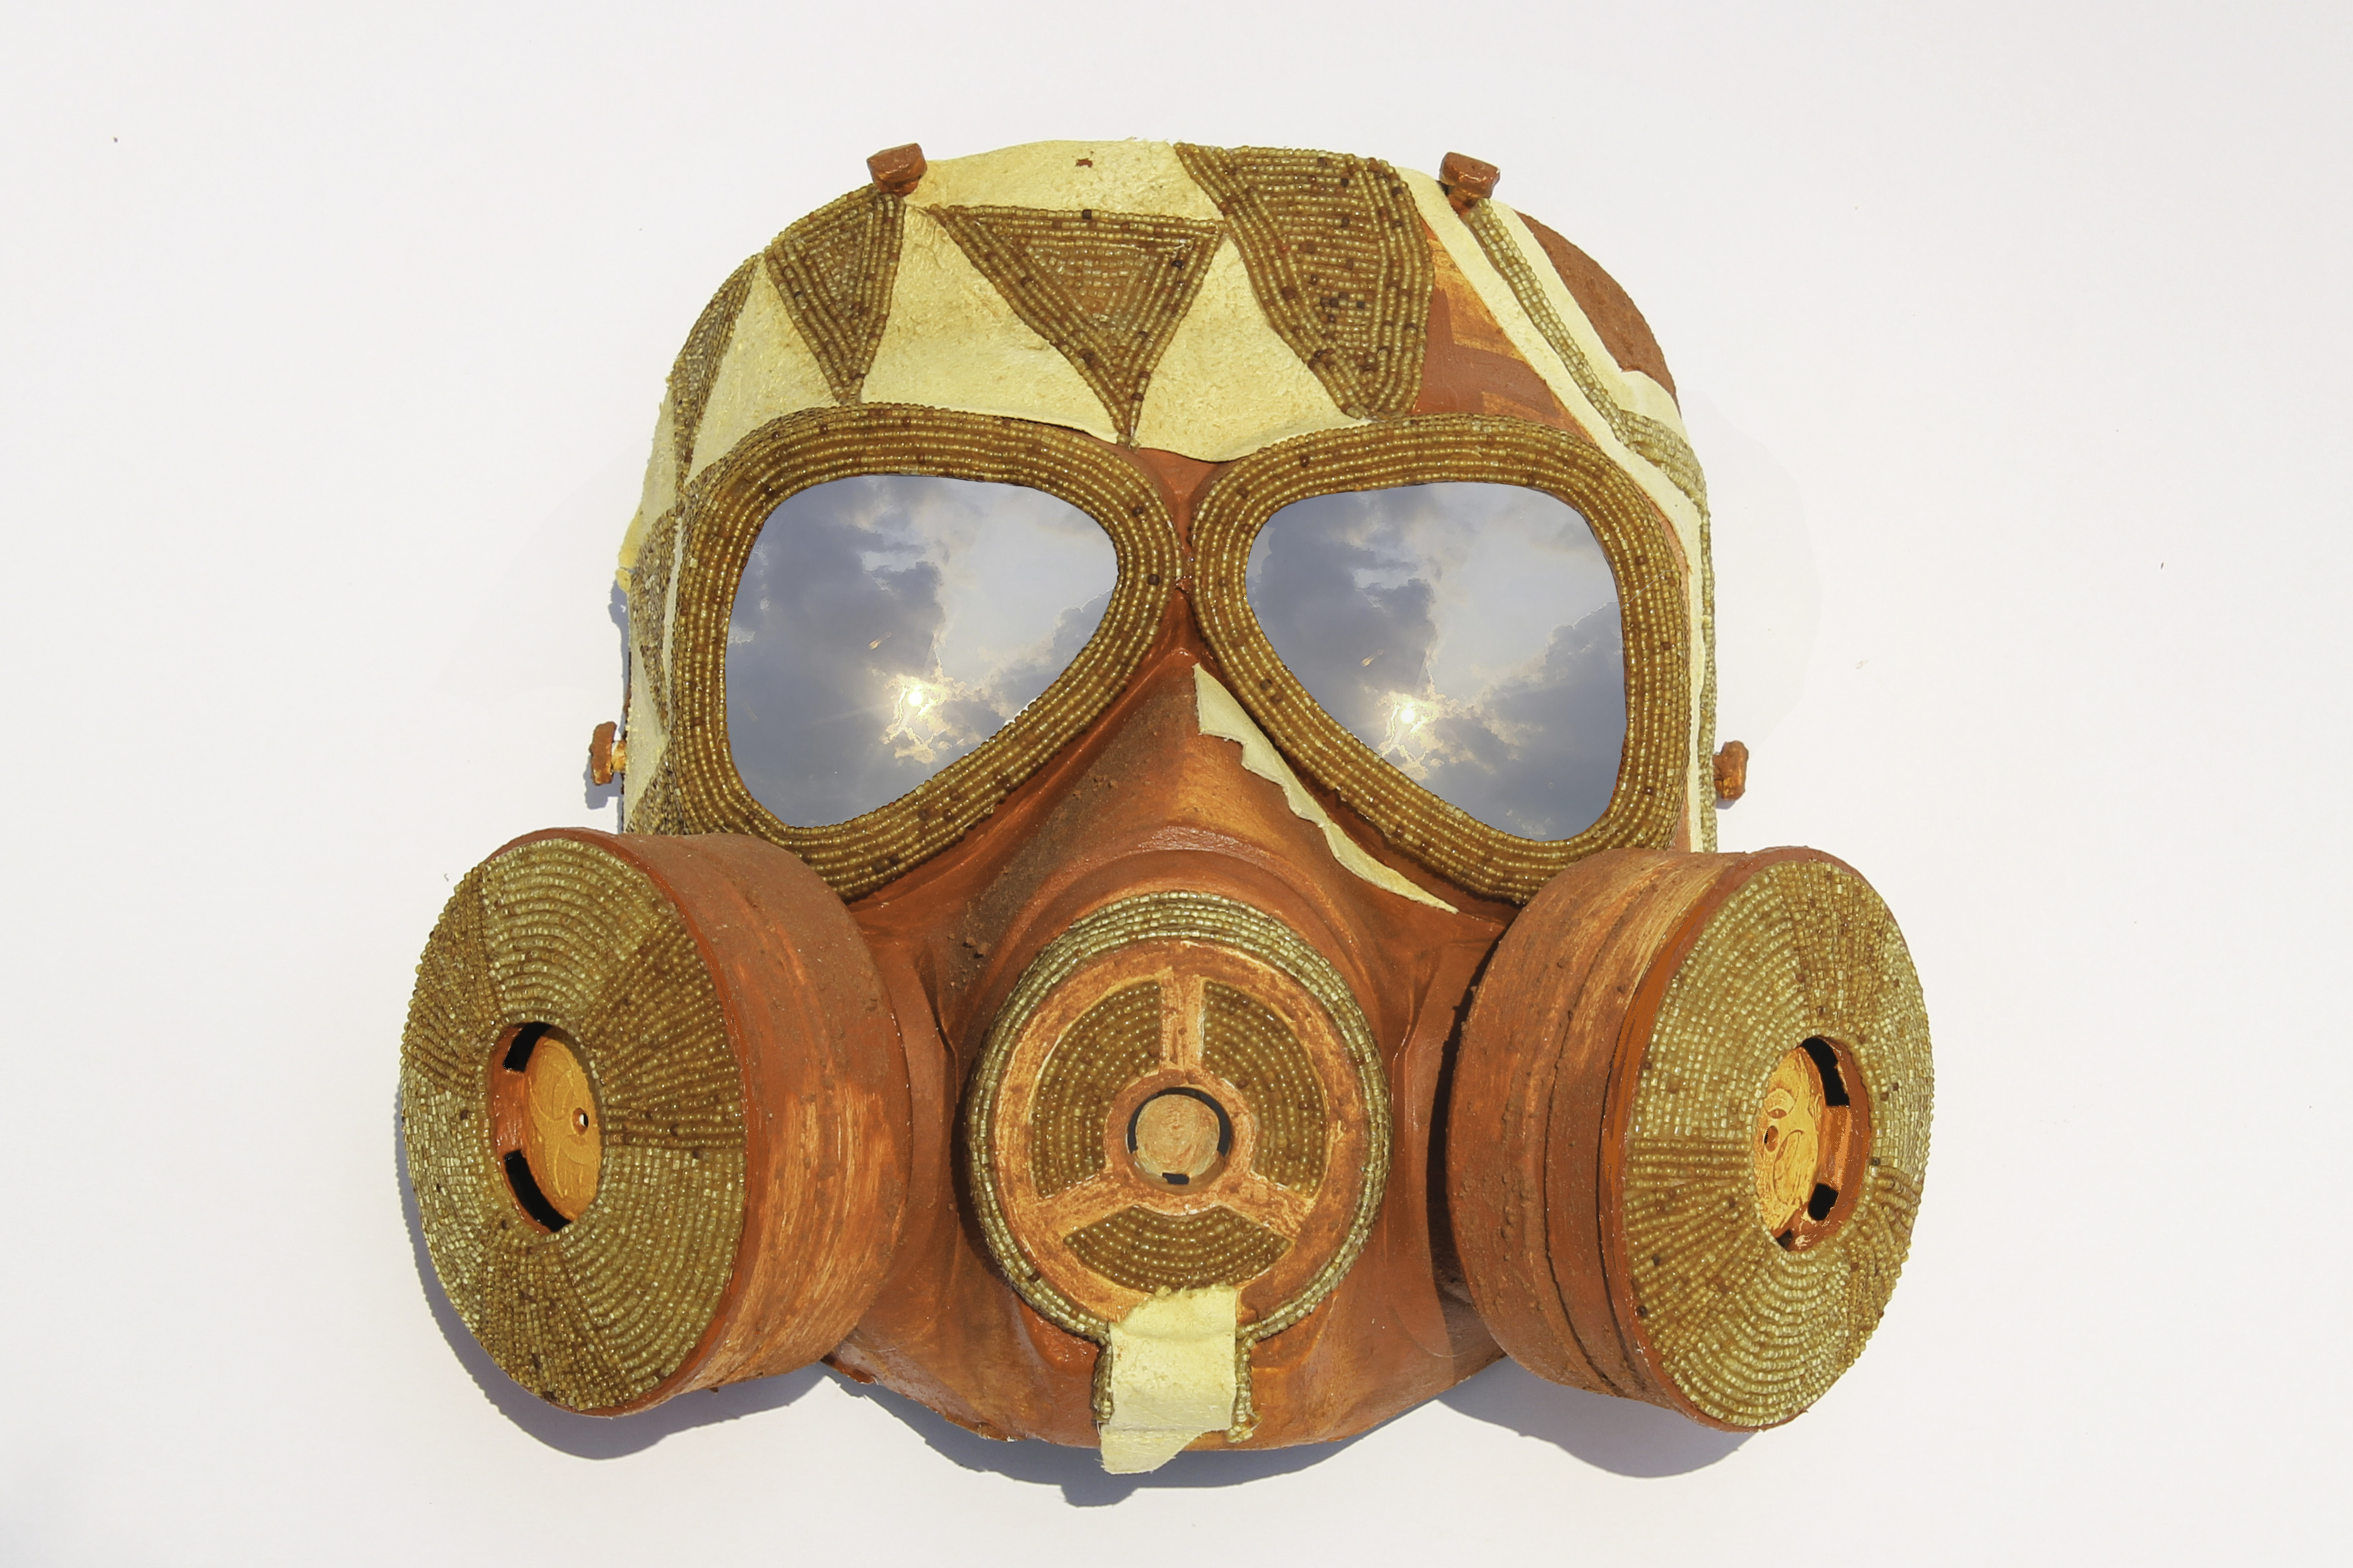 A gas mask decorated with shiny seed beads, animal hide, paint, and Oklahoma red dirt. The added materials form a geometric pattern on the forehead area, and a clouded sky can be seen reflected in the eye lenses of the mask.